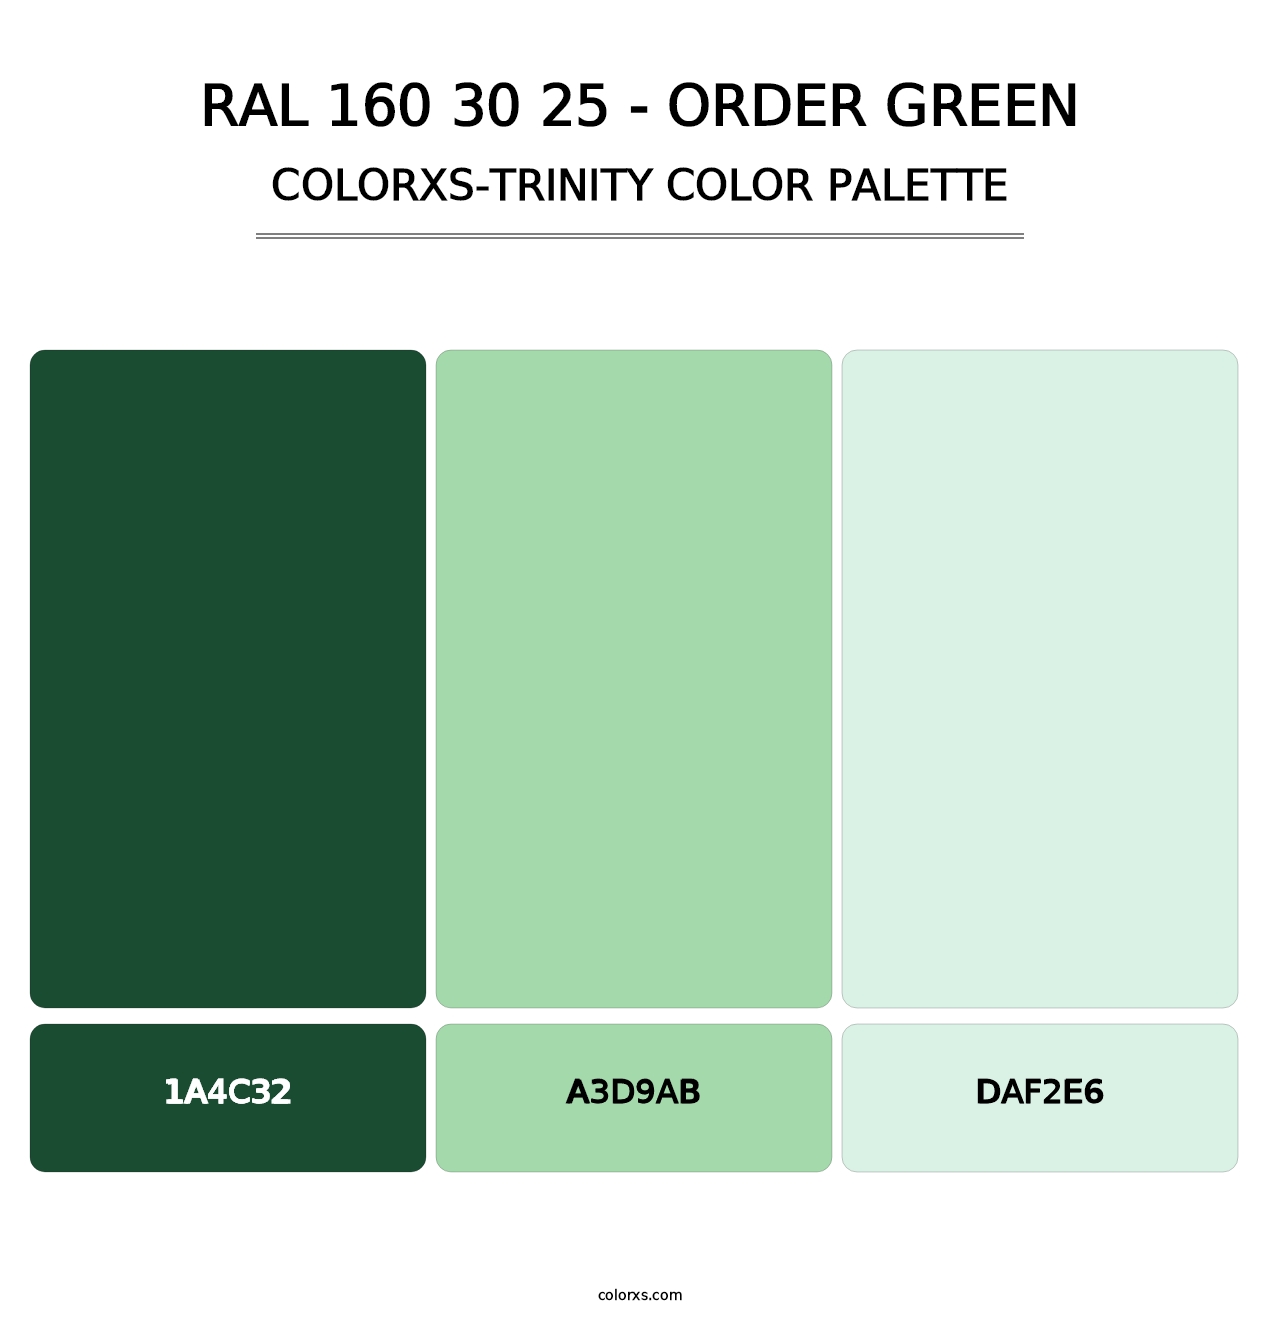 RAL 160 30 25 - Order Green - Colorxs Trinity Palette